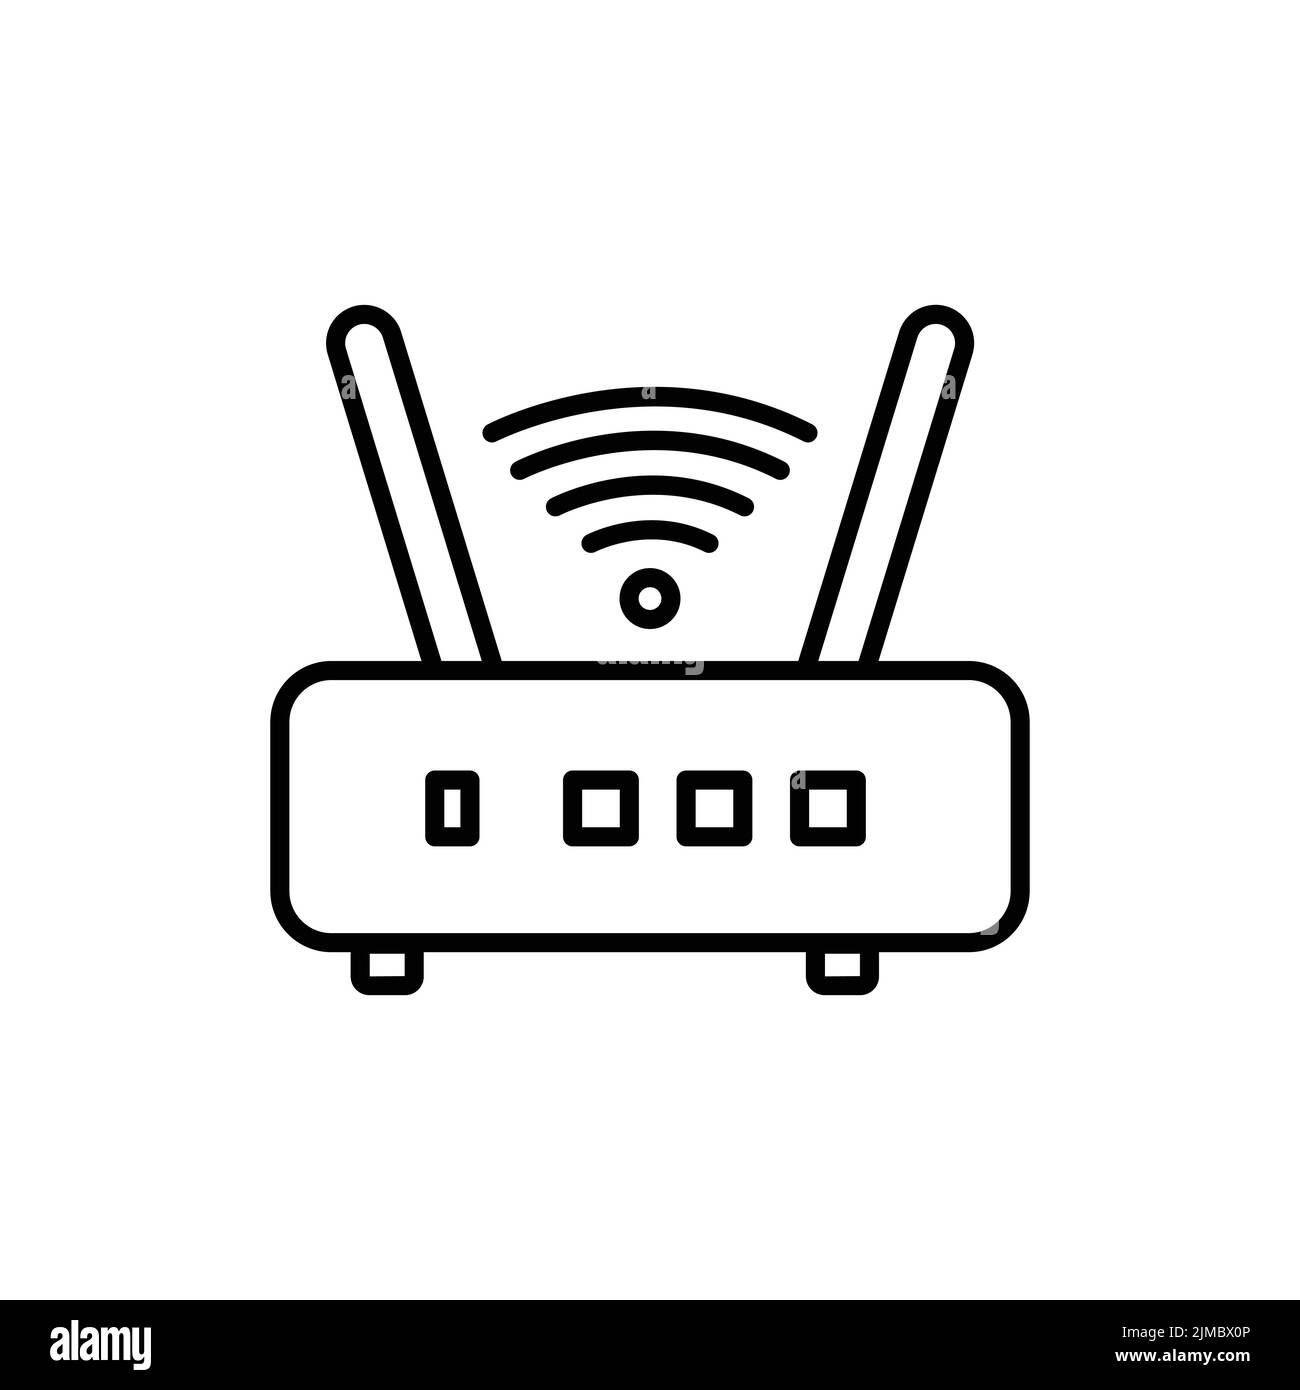 Wireless icon, access point. Icon related to electronic, technology. line icon style. Simple design editable Stock Vector